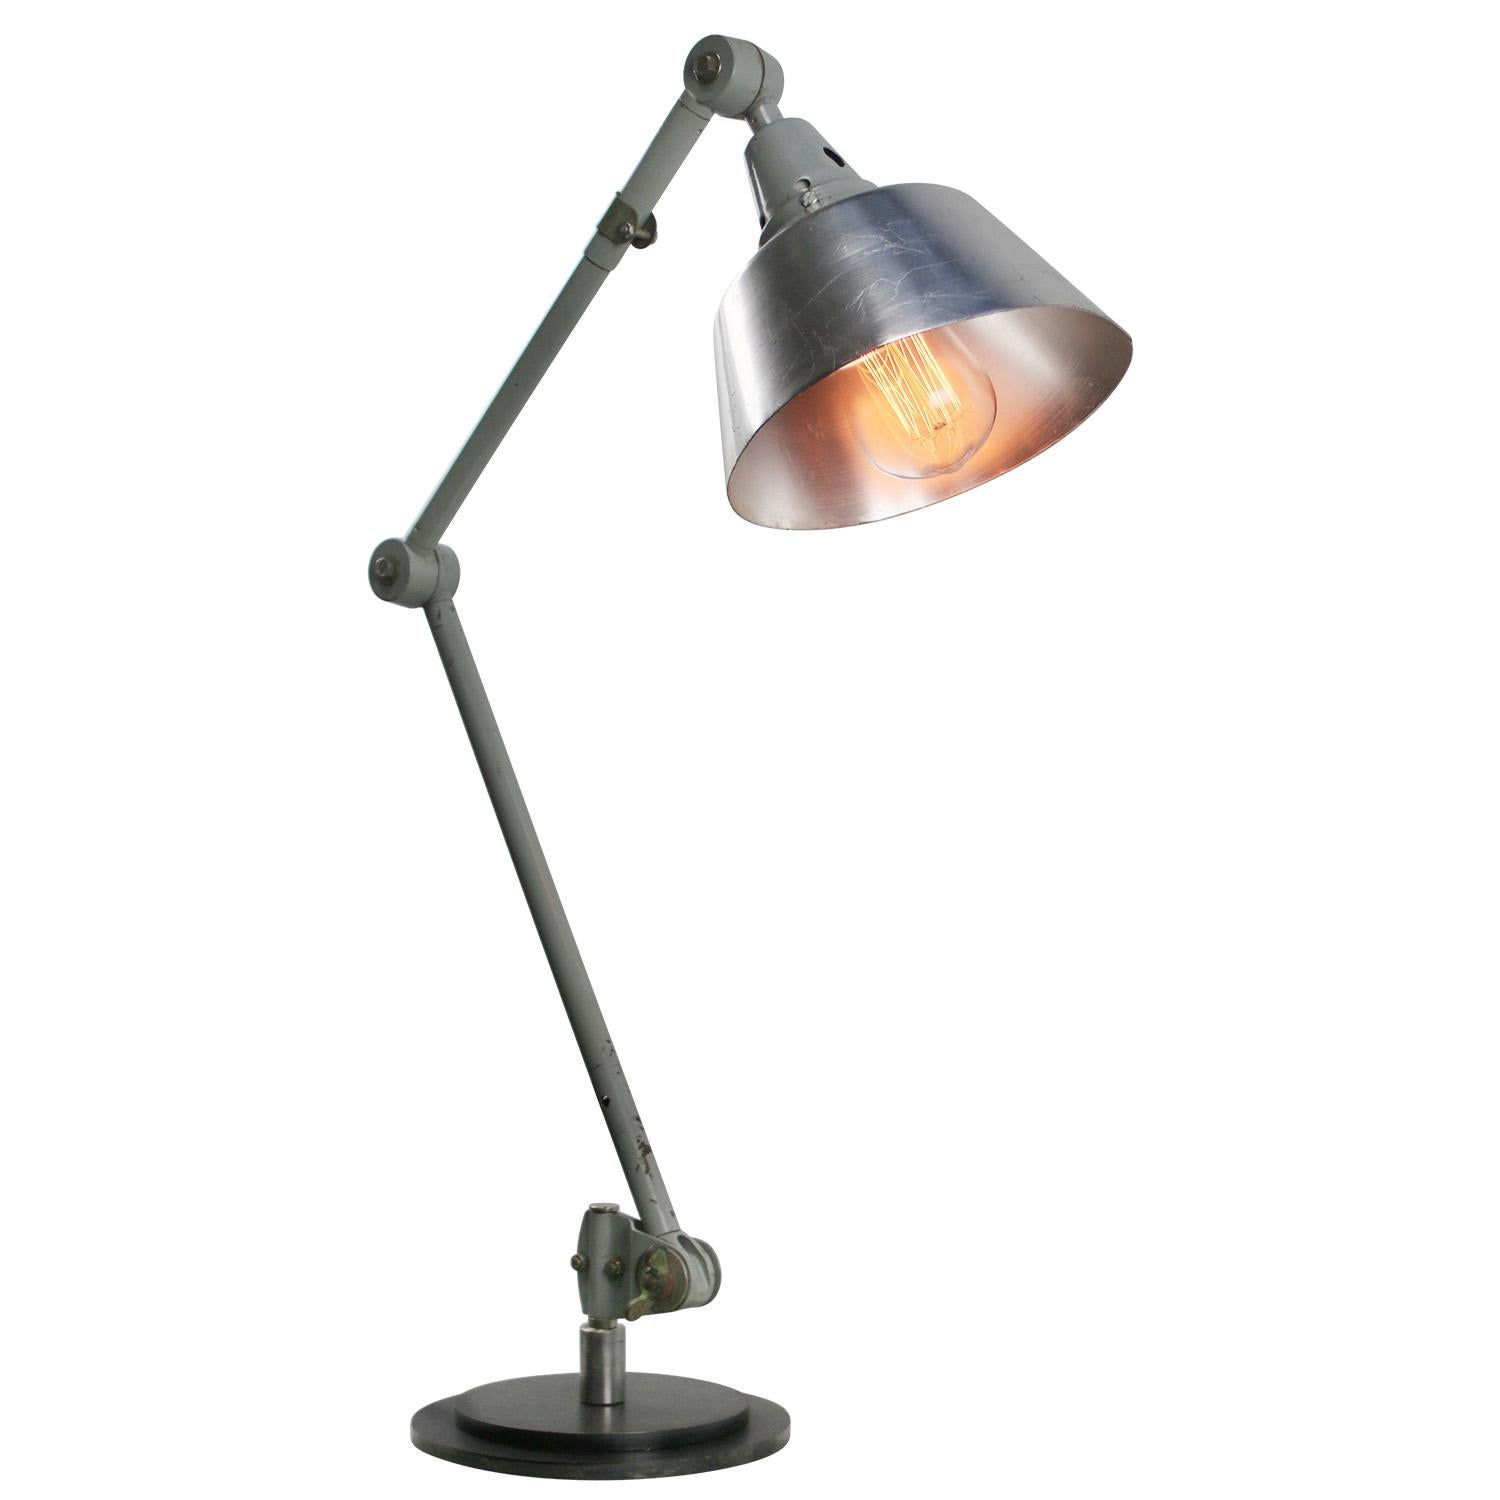 Table lamp made by Midgard
Designed by Curt Fisher
Germany 1950-1959.

Metal with Aluminum Shade
Available with UK / US plug

Weight: 3.50 kg / 7.7 lb

German lighting manufacturer Midgard was founded in 1919 in Auma, Thuringia by industrial